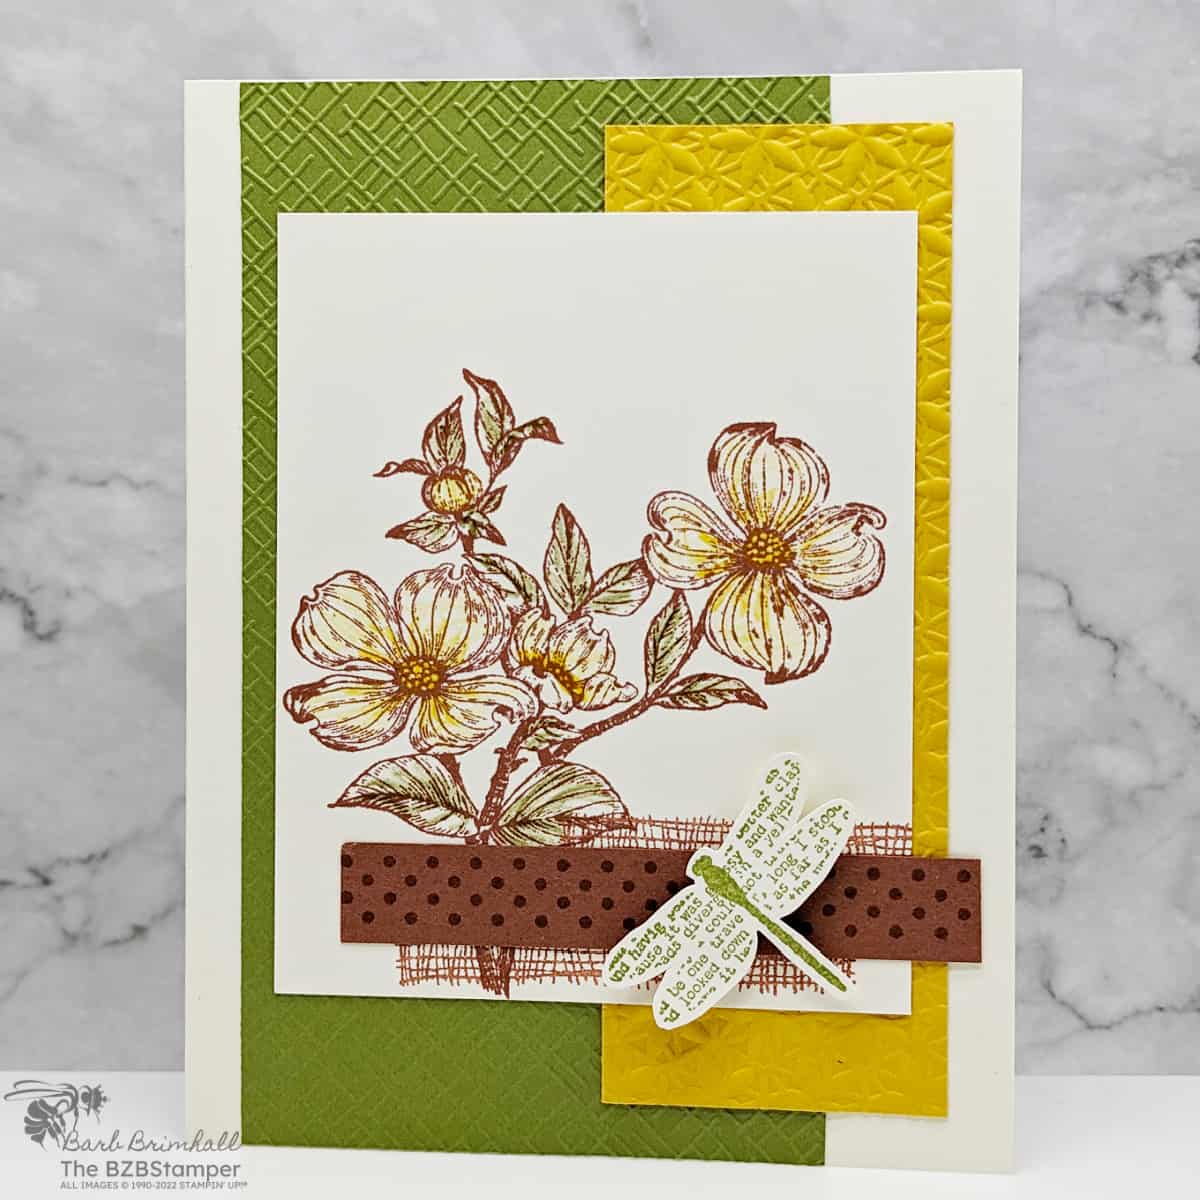 Detailed Dogwood Handmade Card

In green, yellow and brown with a dragonfly image, no sentiment
